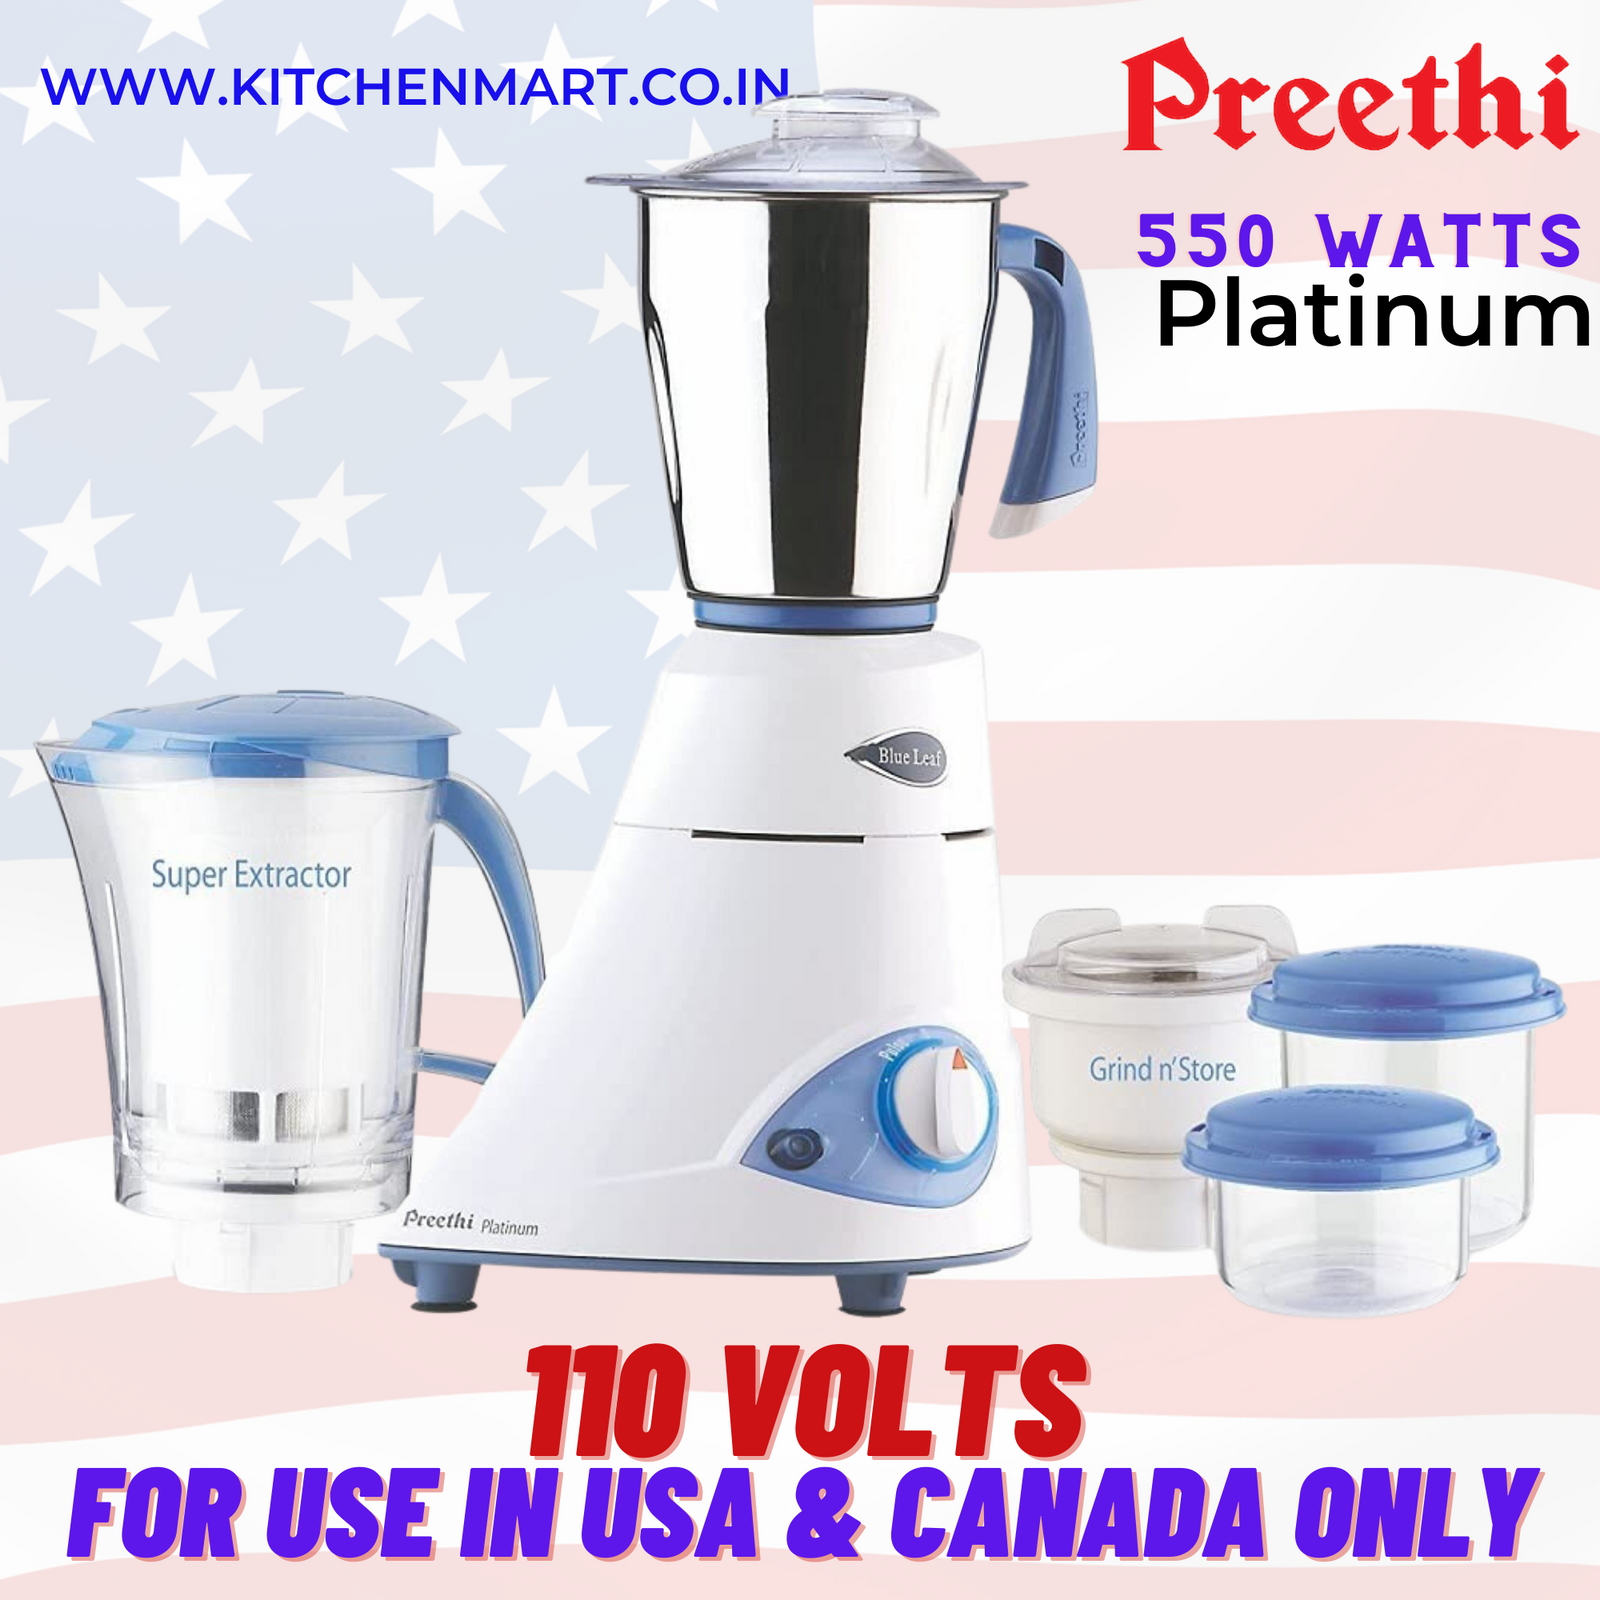 Premier Lifestyle Tilting Wet Grinder with Atta Kneader and Coconut Scrapper - 2 Liters - 110V/60 Hz - USA and Canada